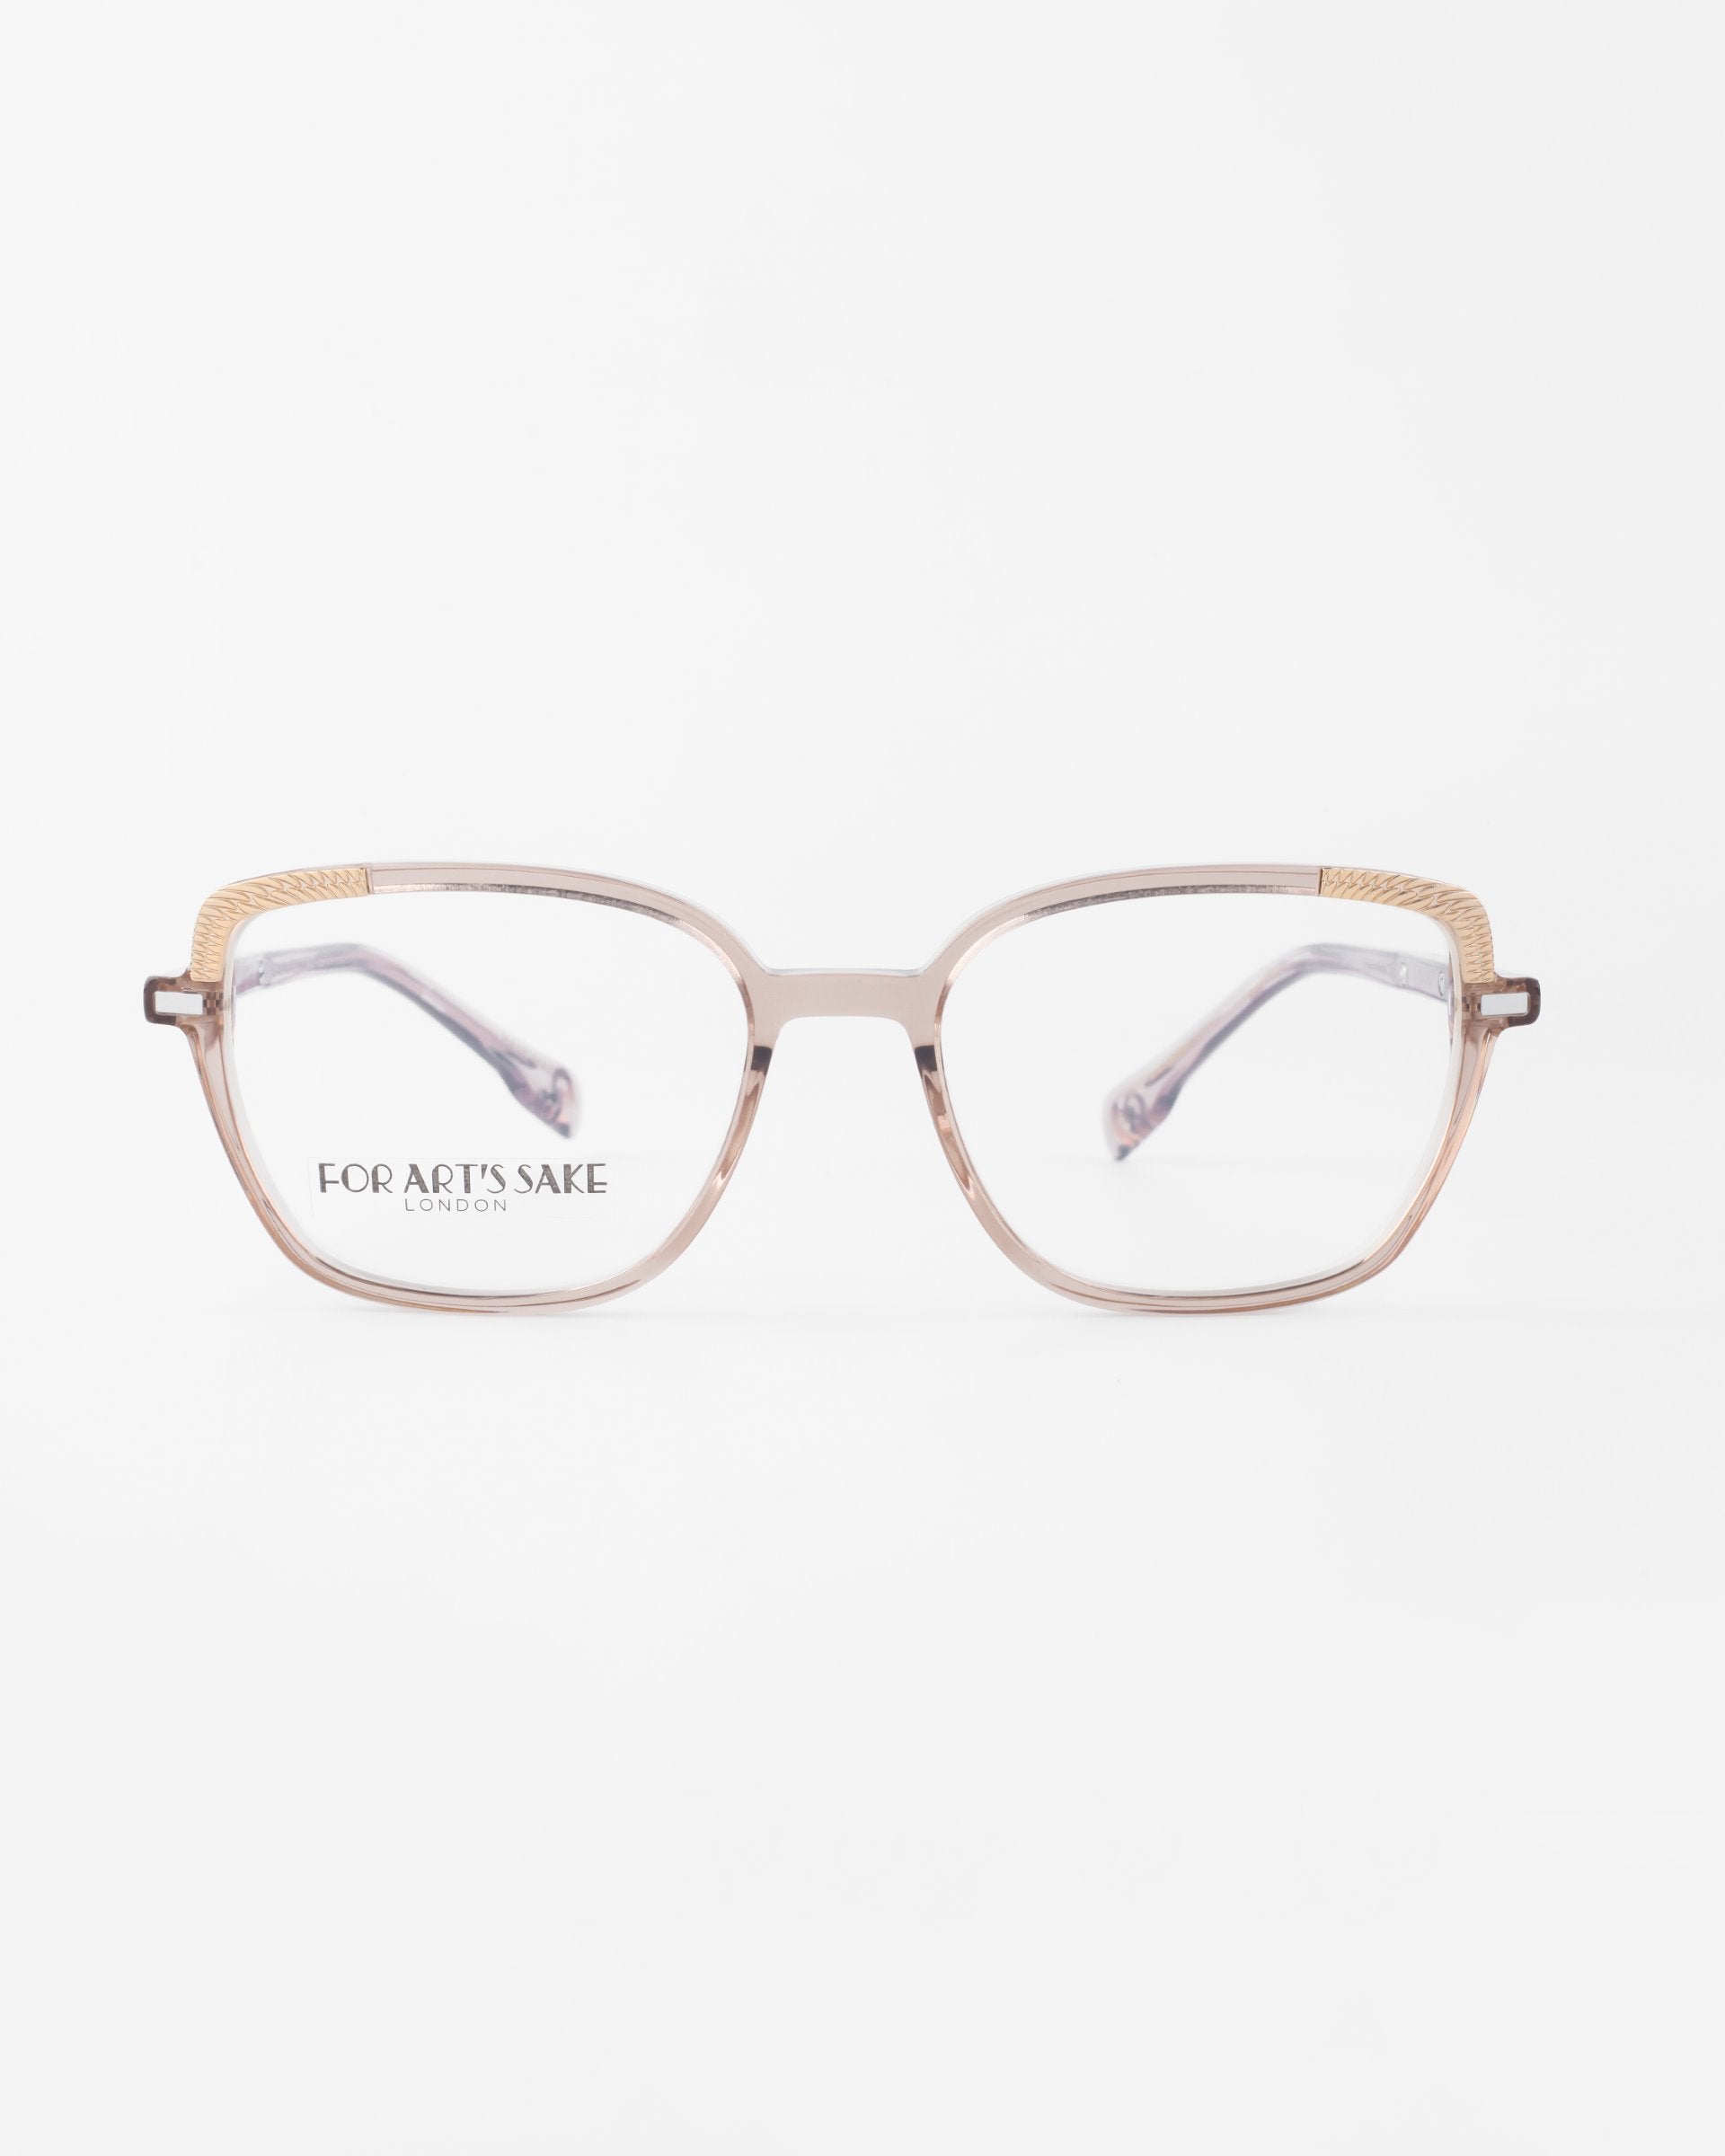 A pair of stylish eyeglasses with prescription lenses and a beige frame. The temples feature an elegant 18-karat gold-plated accent near the front. The brand name "For Art's Sake®" is visible on the left lens. The background is plain white.

Product Name: Mimosa